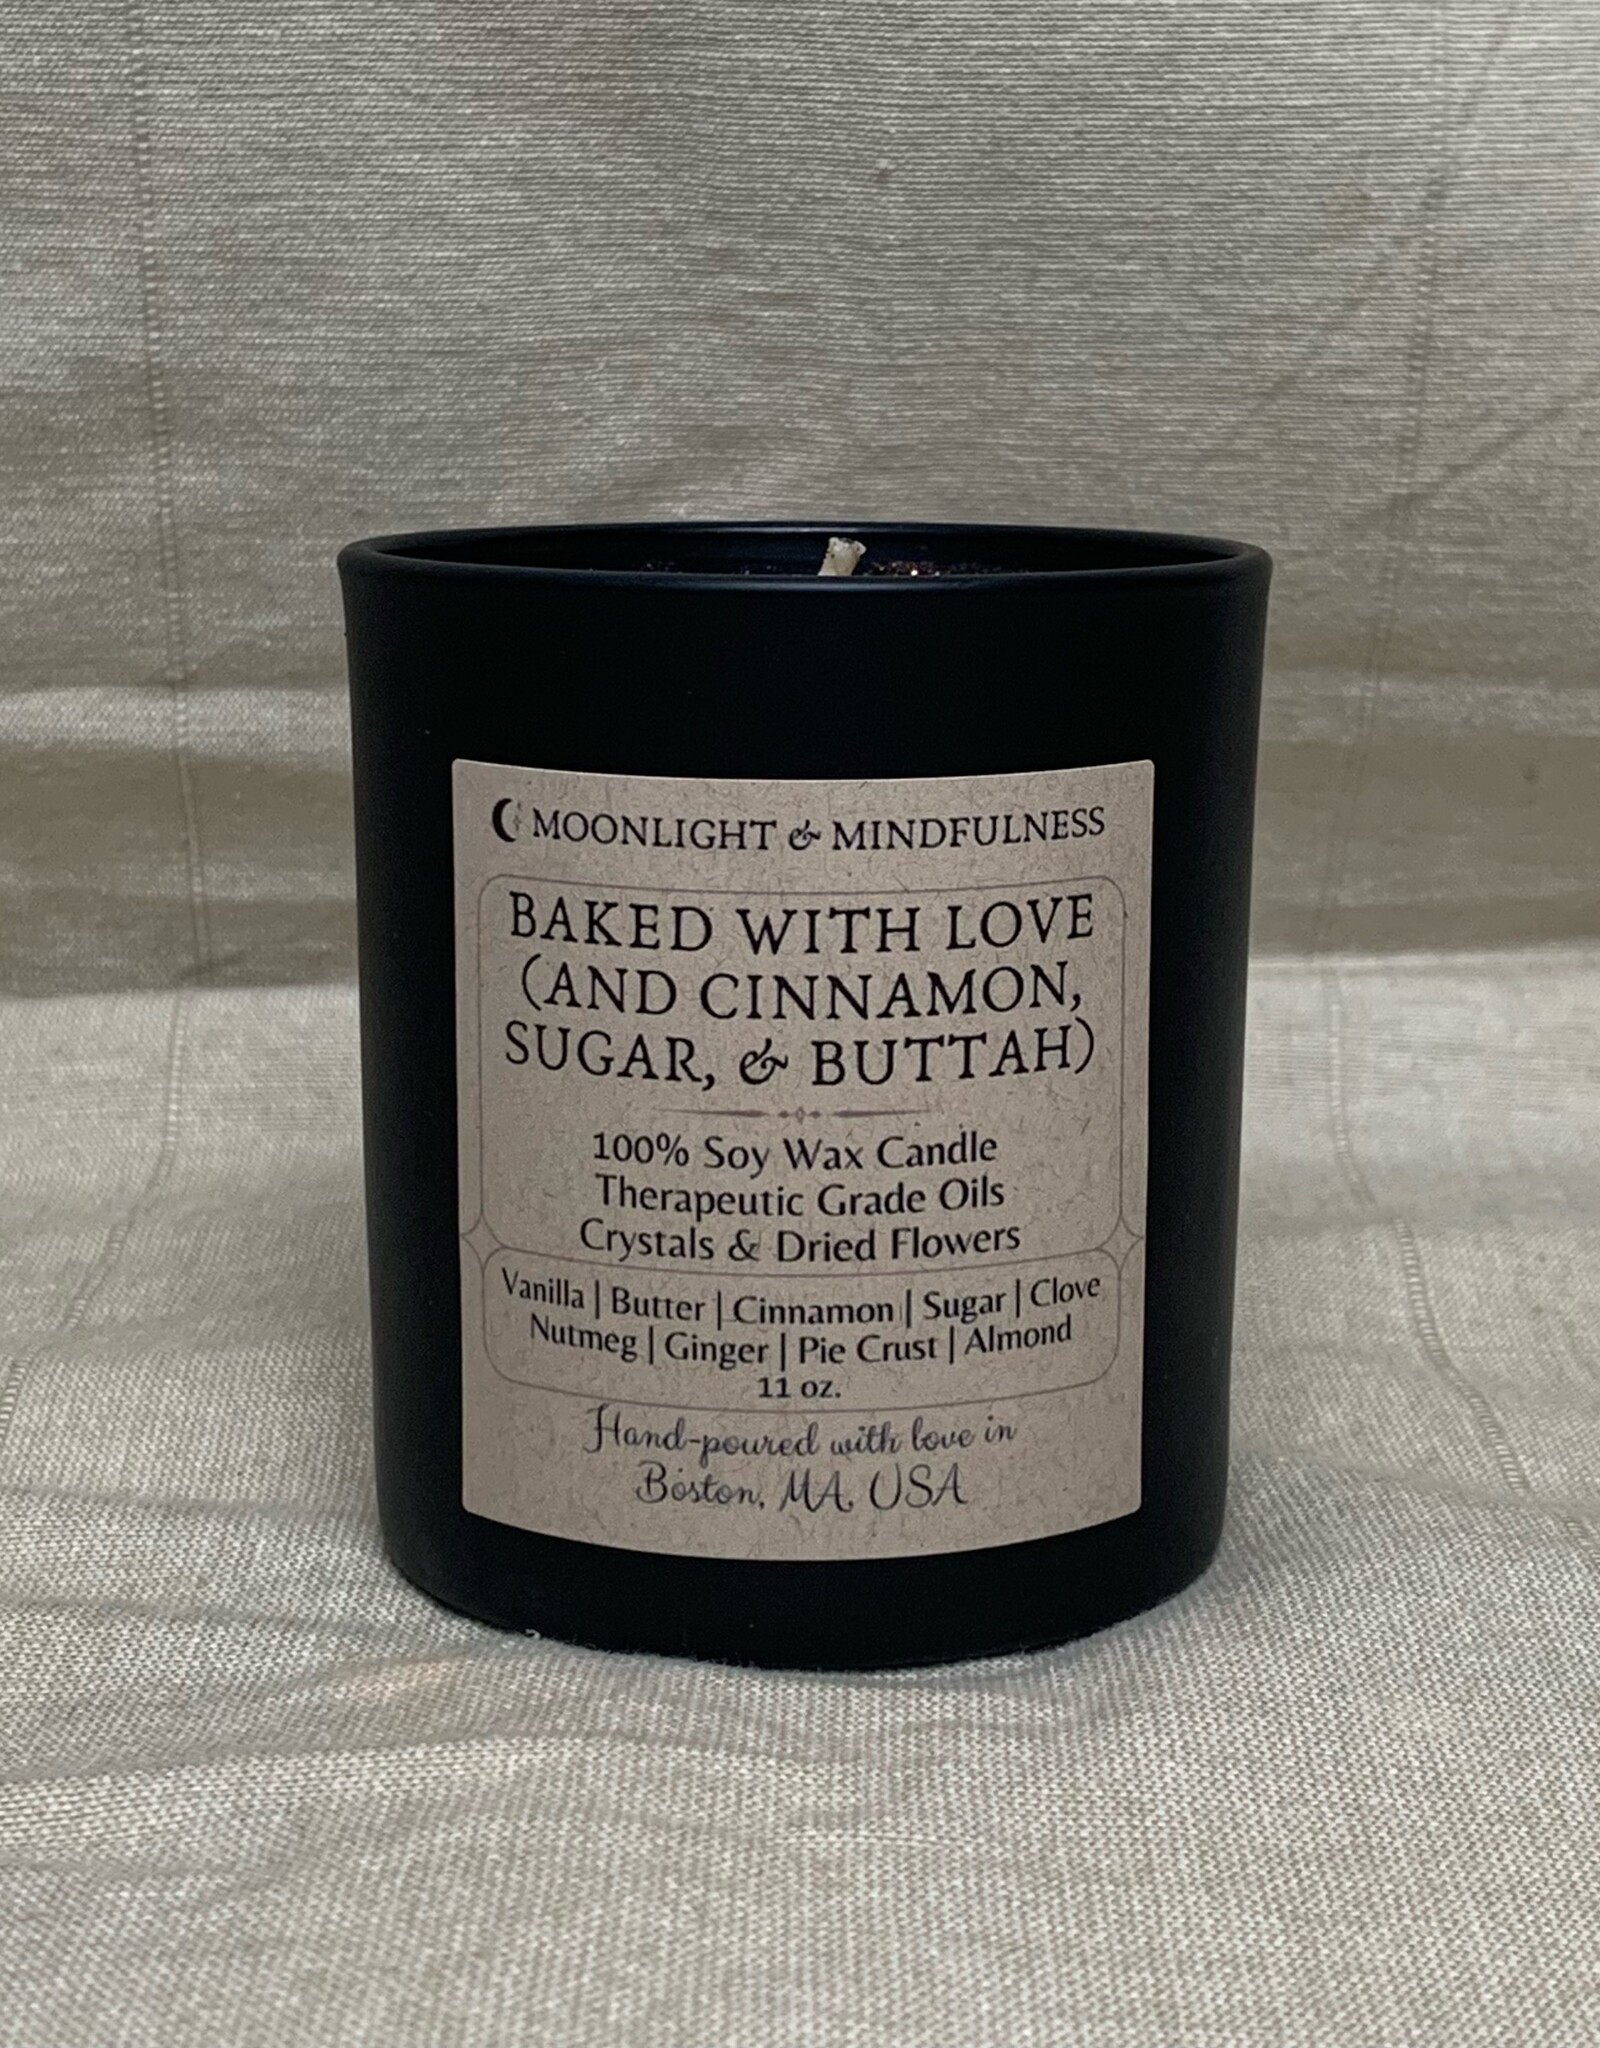 Moonlight and Mindfulness Baked With Love 11oz Candle (Fall)